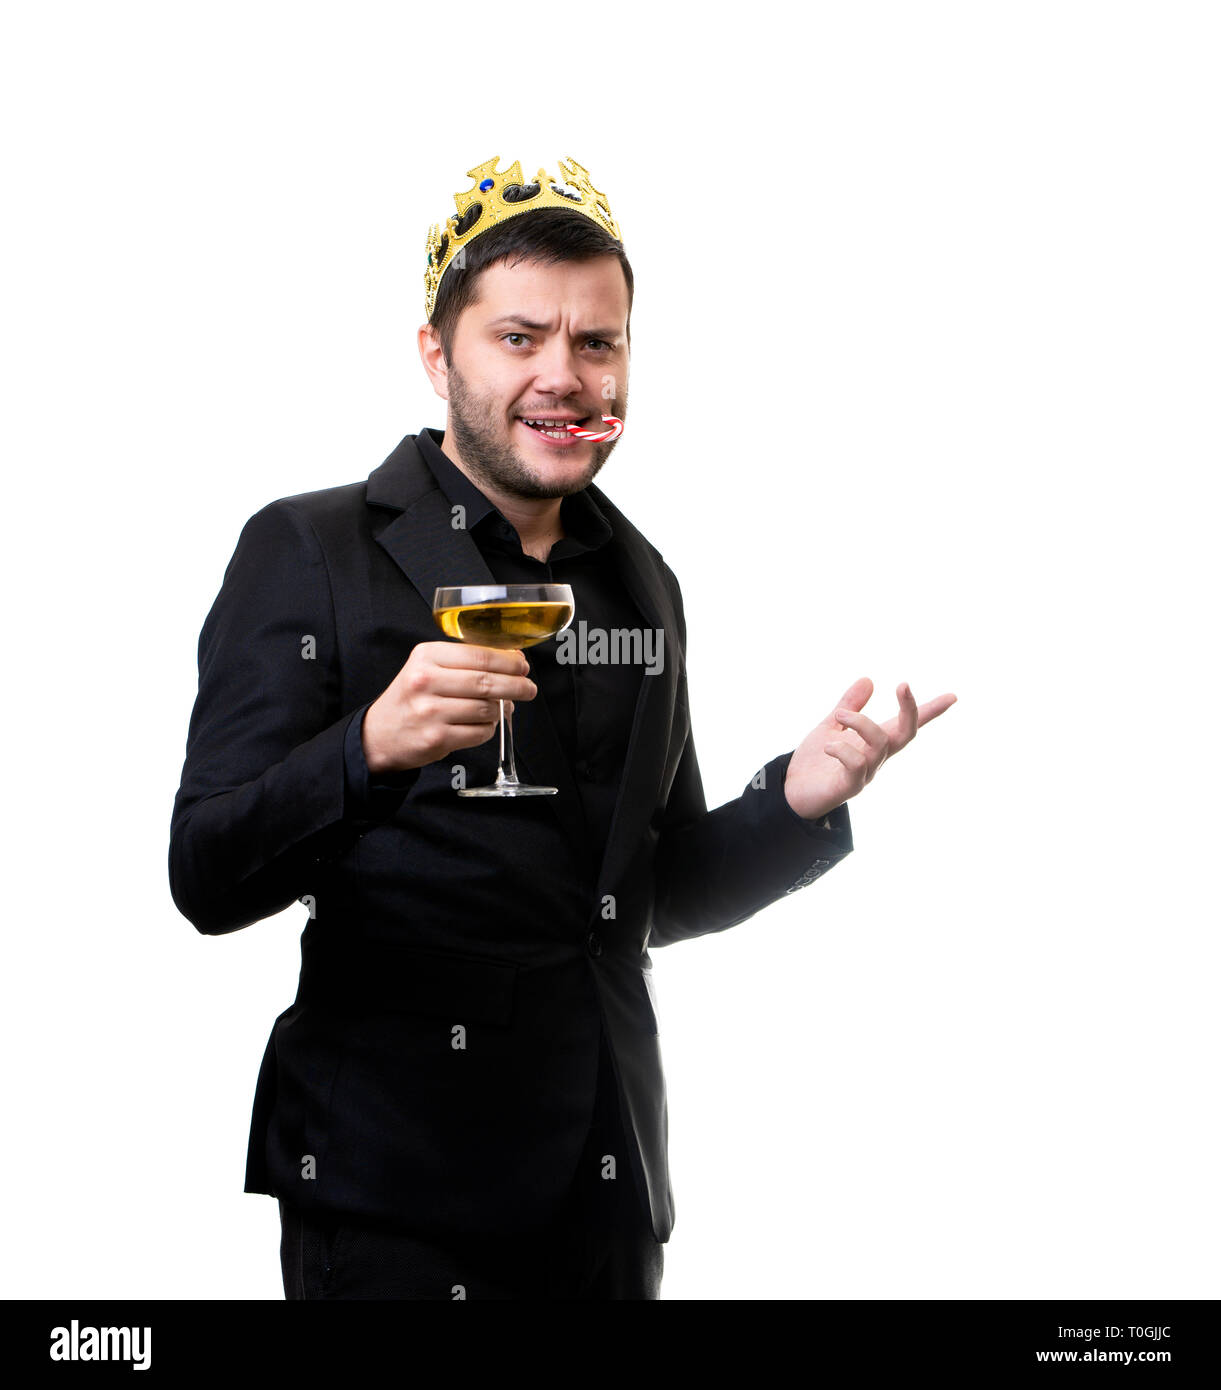 Happy man in crown, black suit with wine glass. Stock Photo